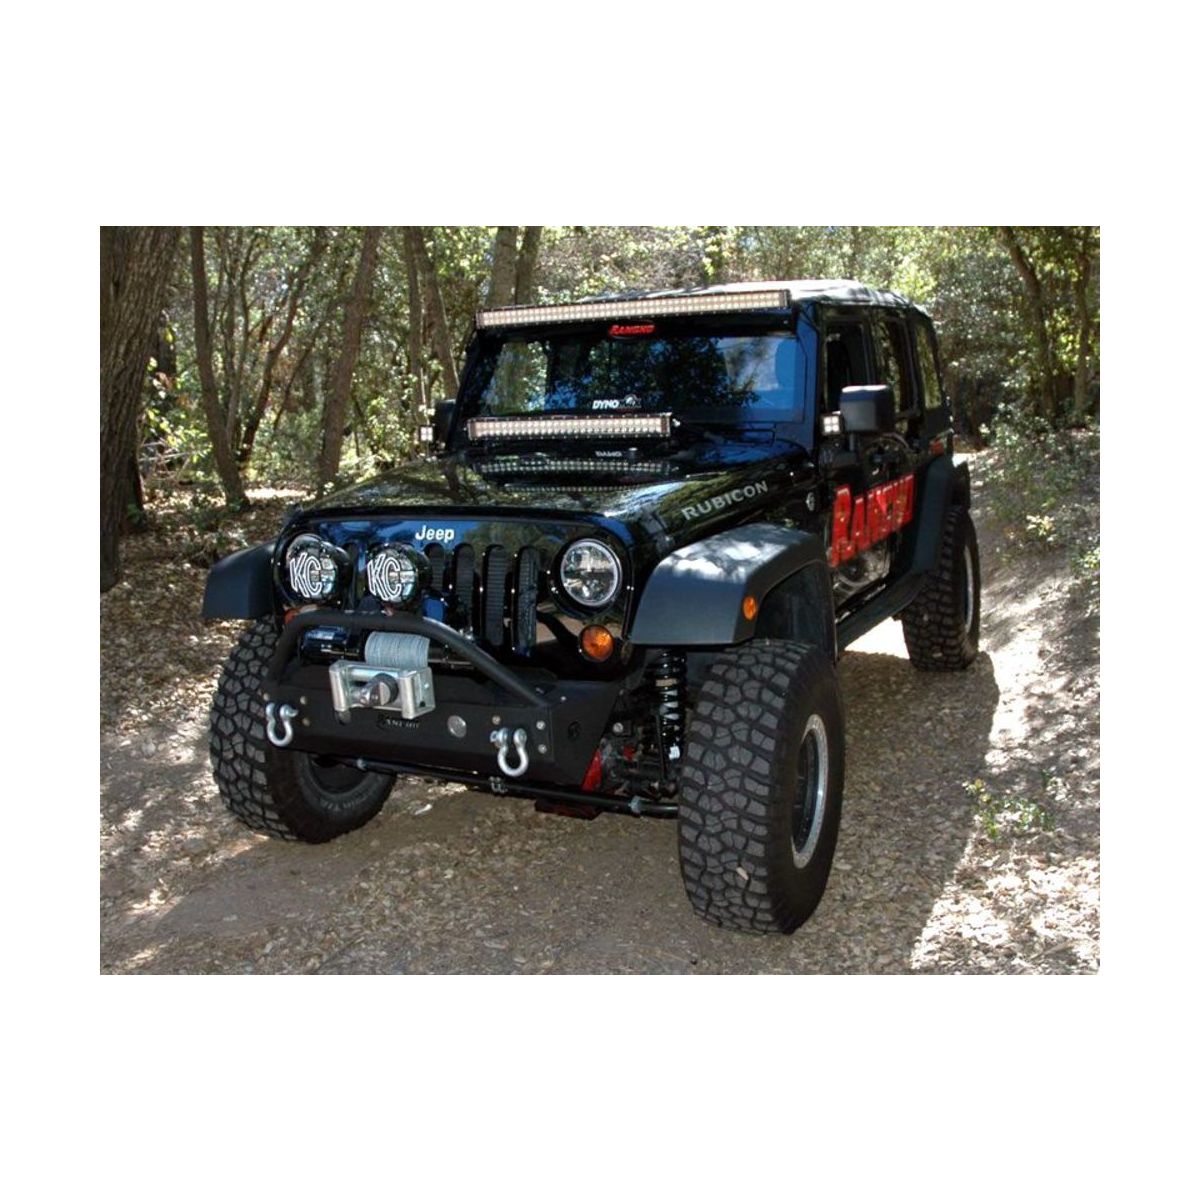 Discontinued - KC HiLiTES 50" C-SERIES C50 LED - LIGHT BAR SYSTEM - 300W COMBO SPOT / SPREAD BEAM - FOR 07-18 JEEP JK # 366